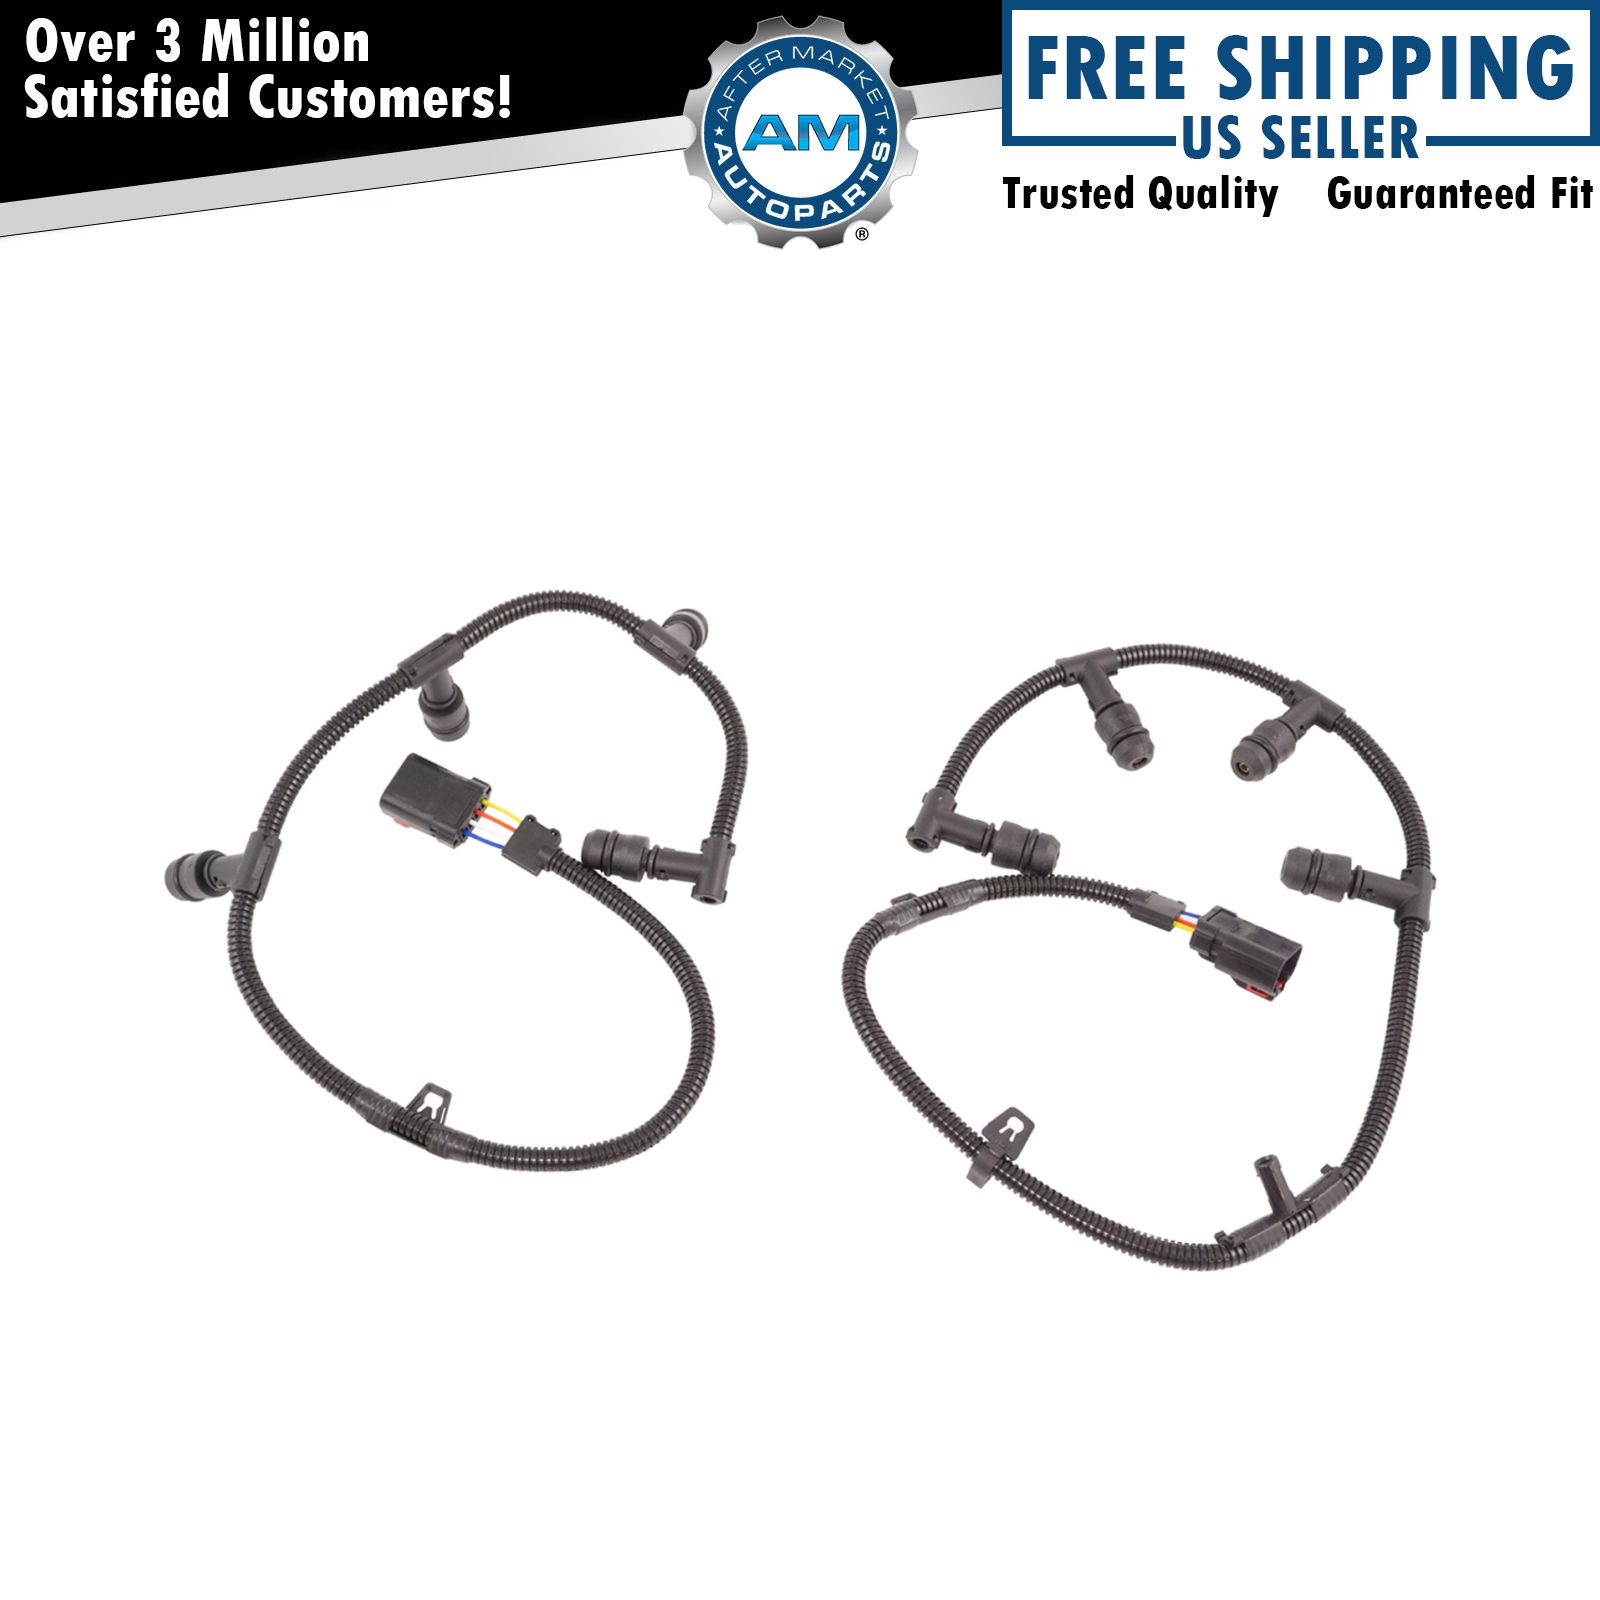 Diesel Glow Plug Wire Harness Left Right Pair with Tool for 6.0L Powerstroke